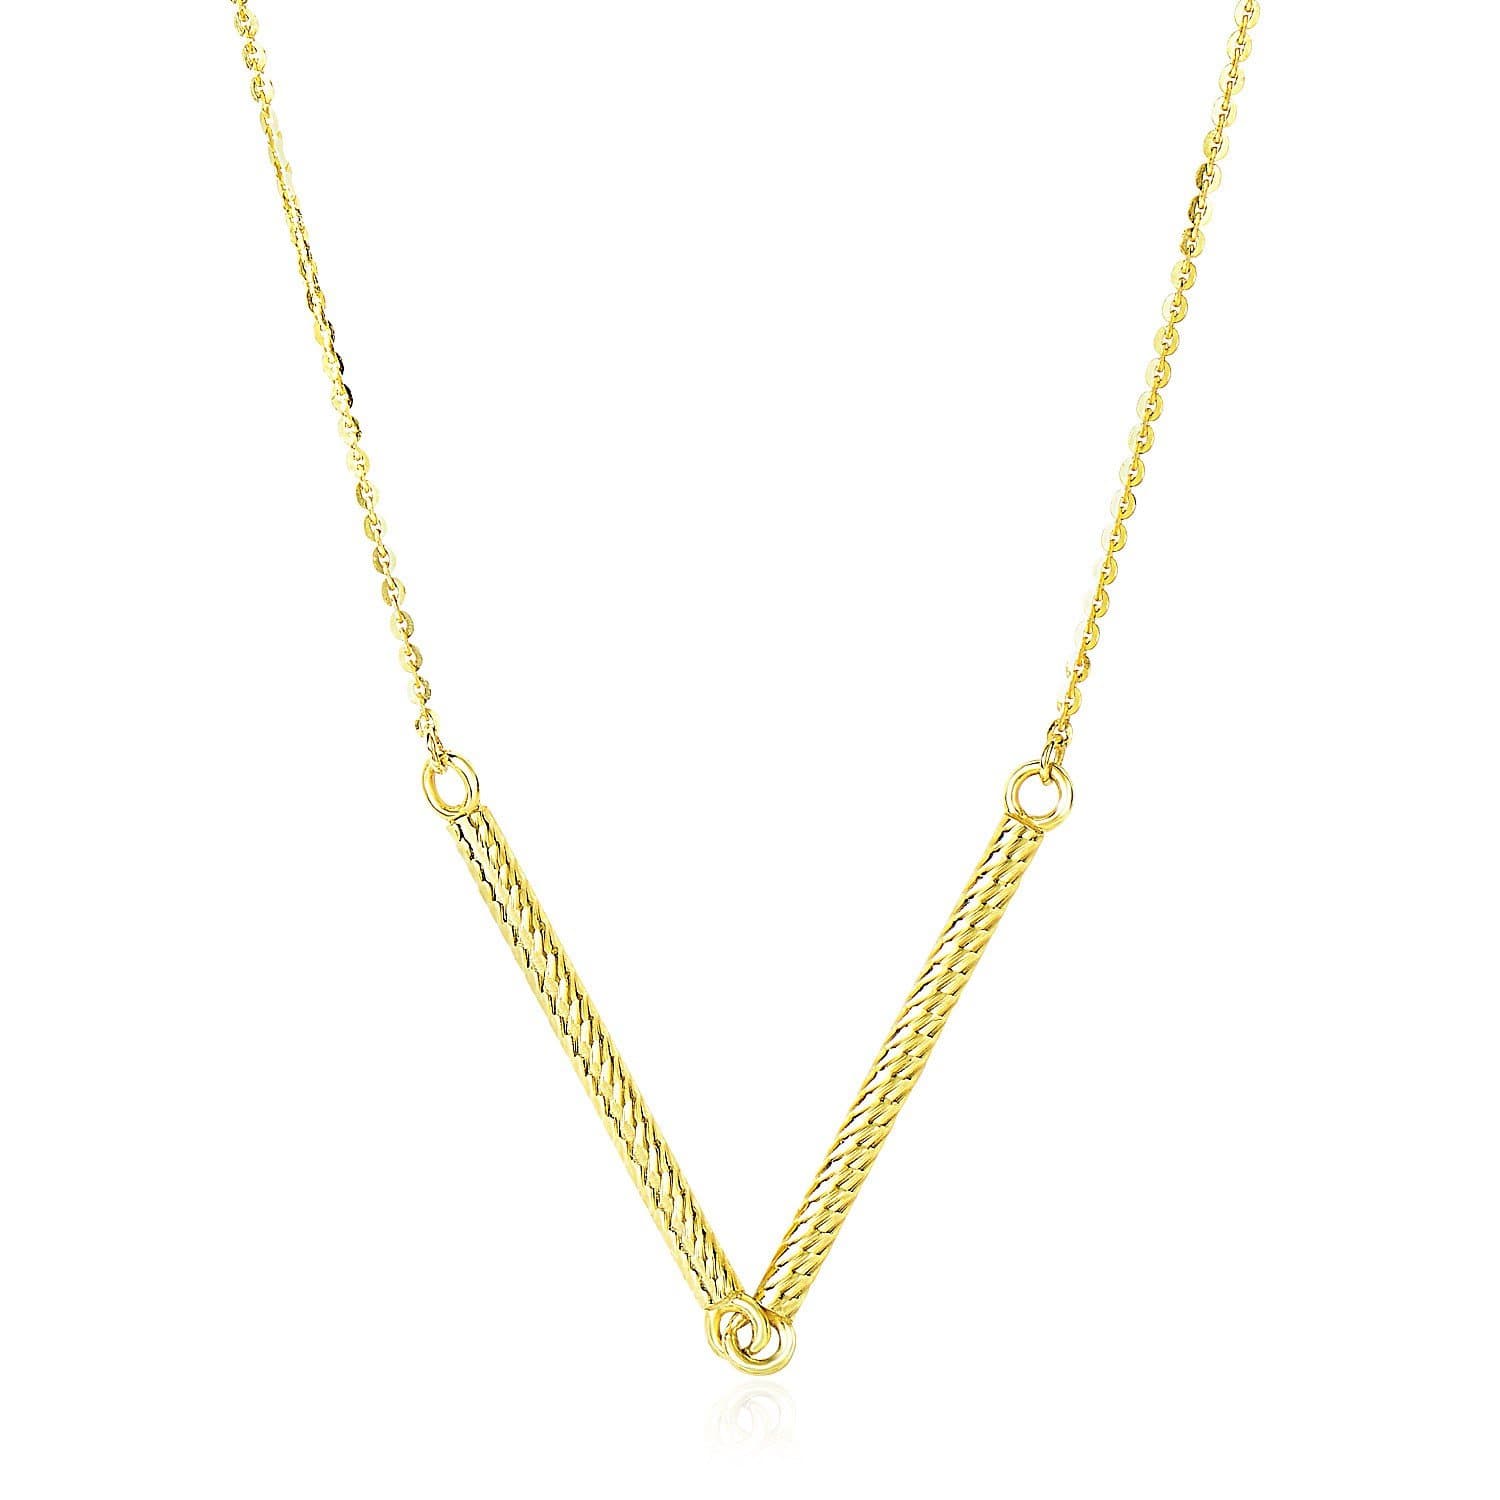 14k Yellow Gold Chain Necklace with Two Connected Thin Bar Pendant